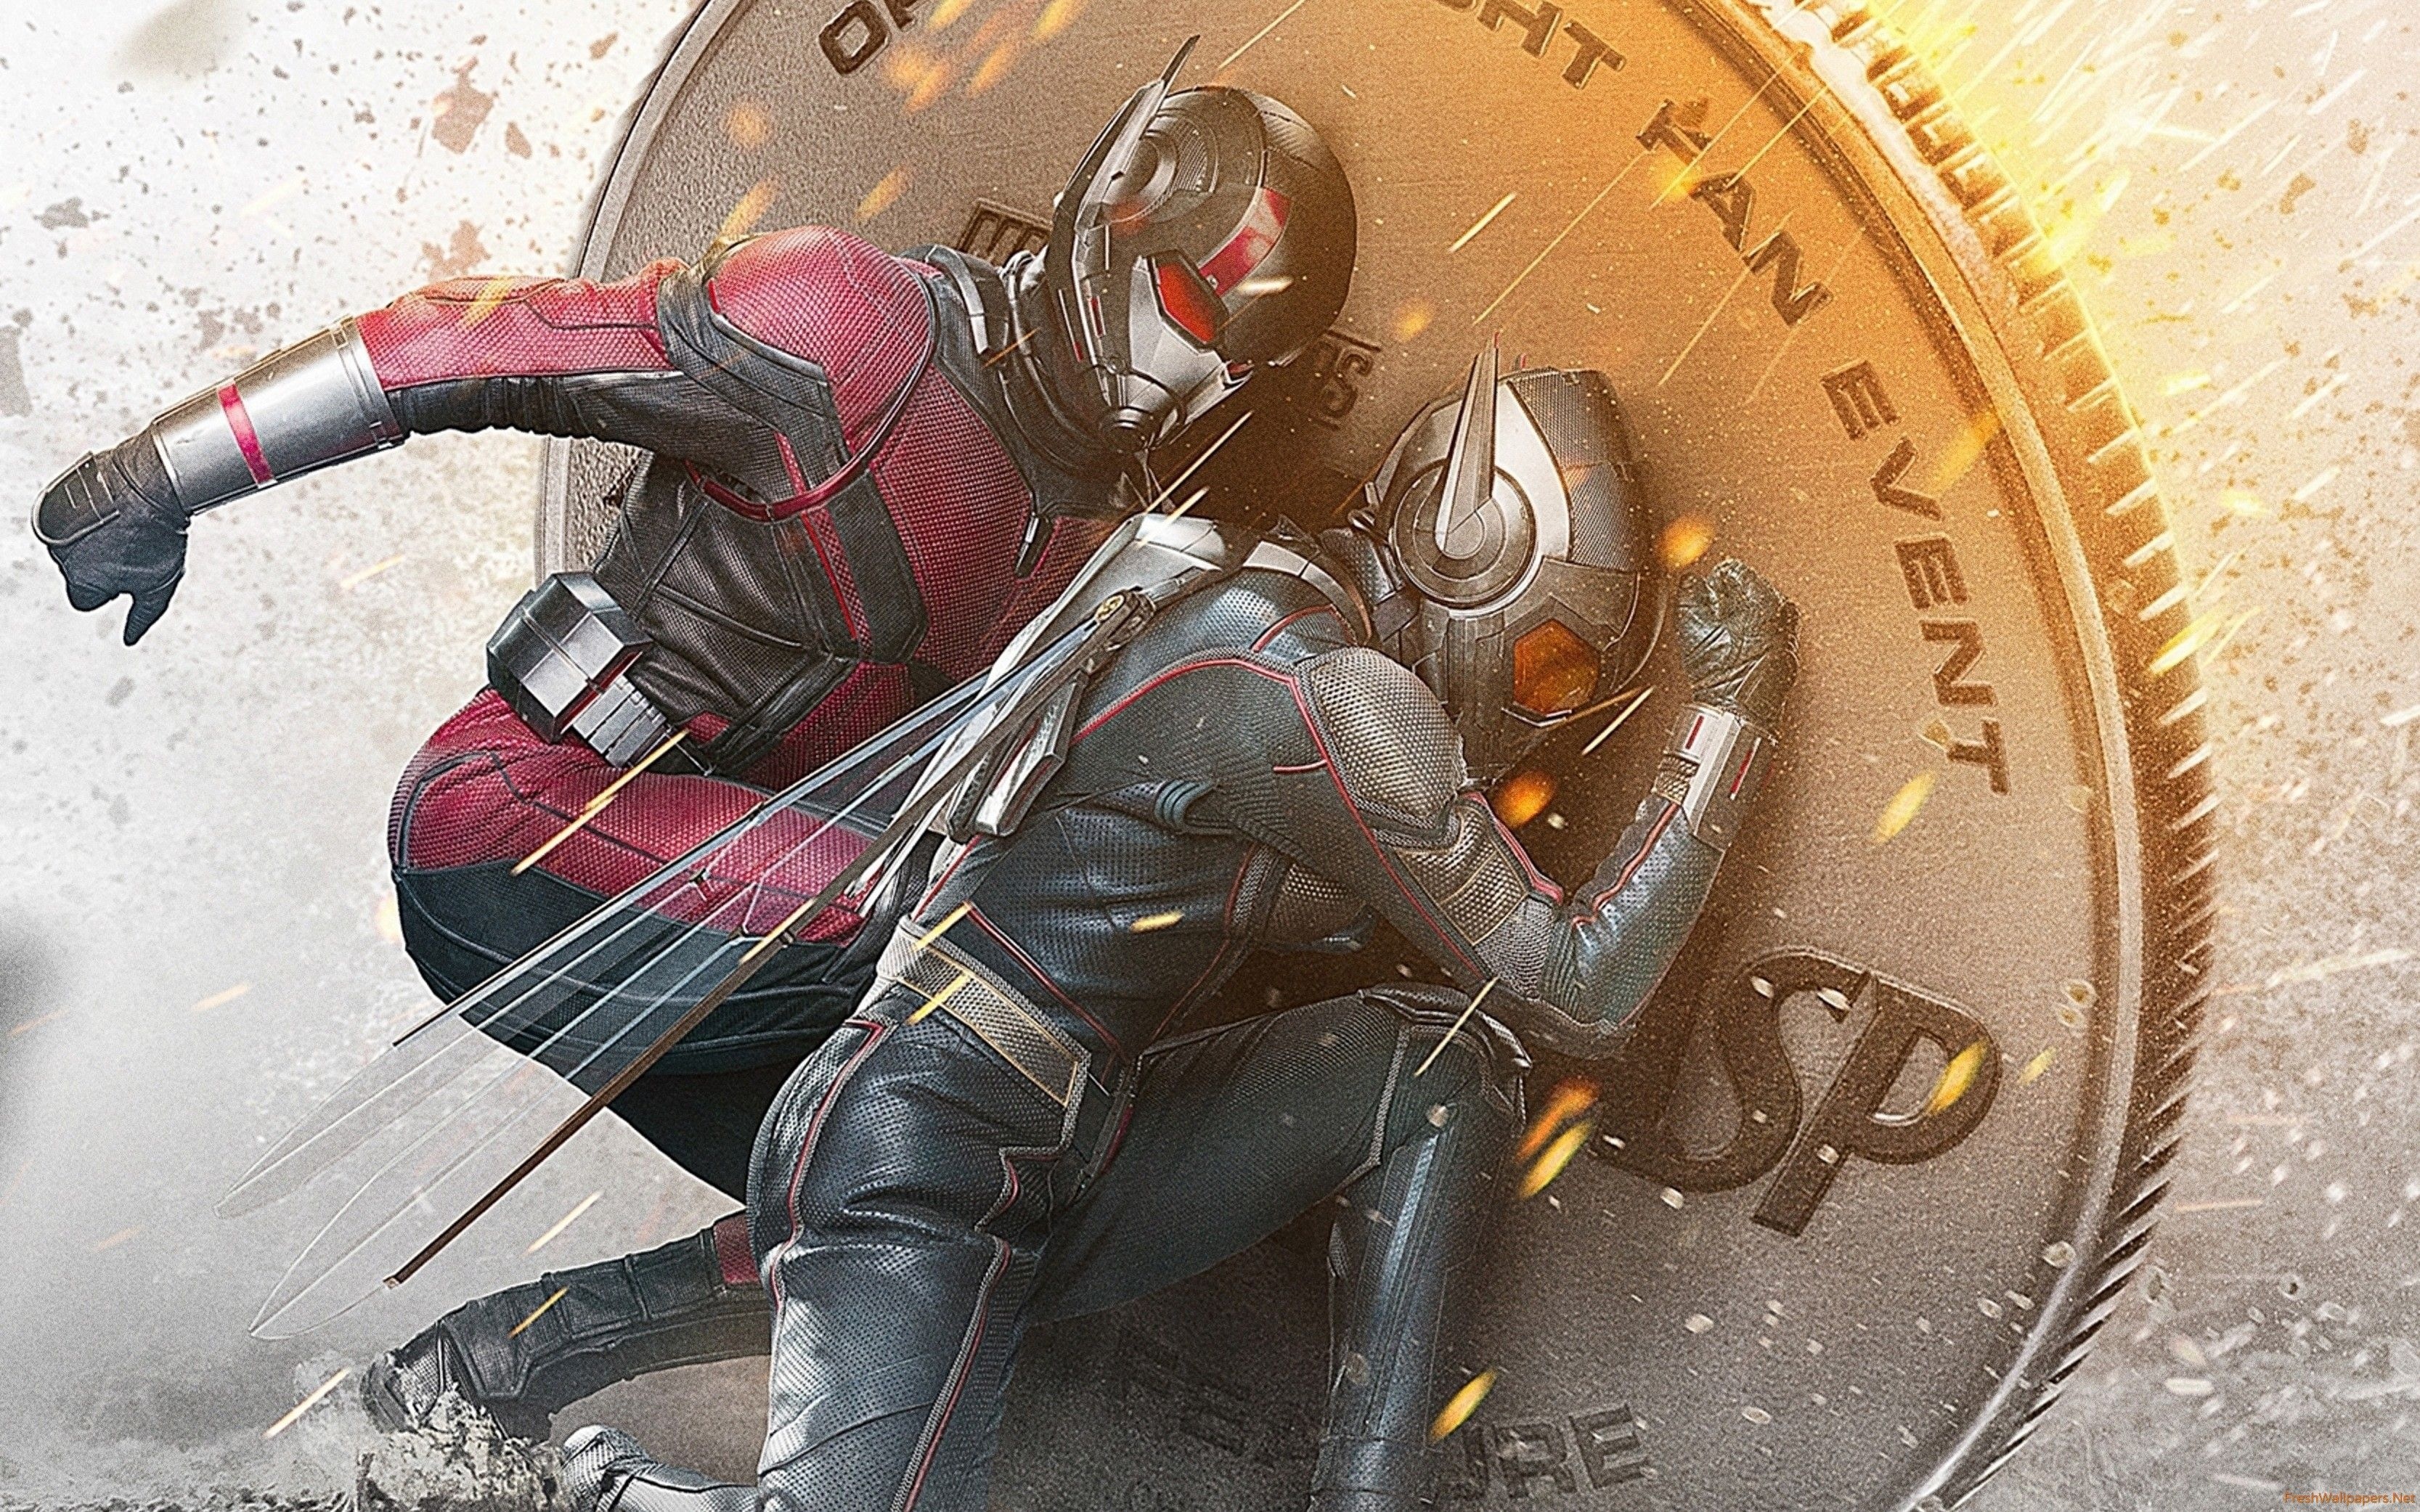 Ant-Man and the Wasp: Quantumania: Scott Lang and Hope Van Dyne battling against the evil time traveler Kang the Conqueror. 3340x2090 HD Background.